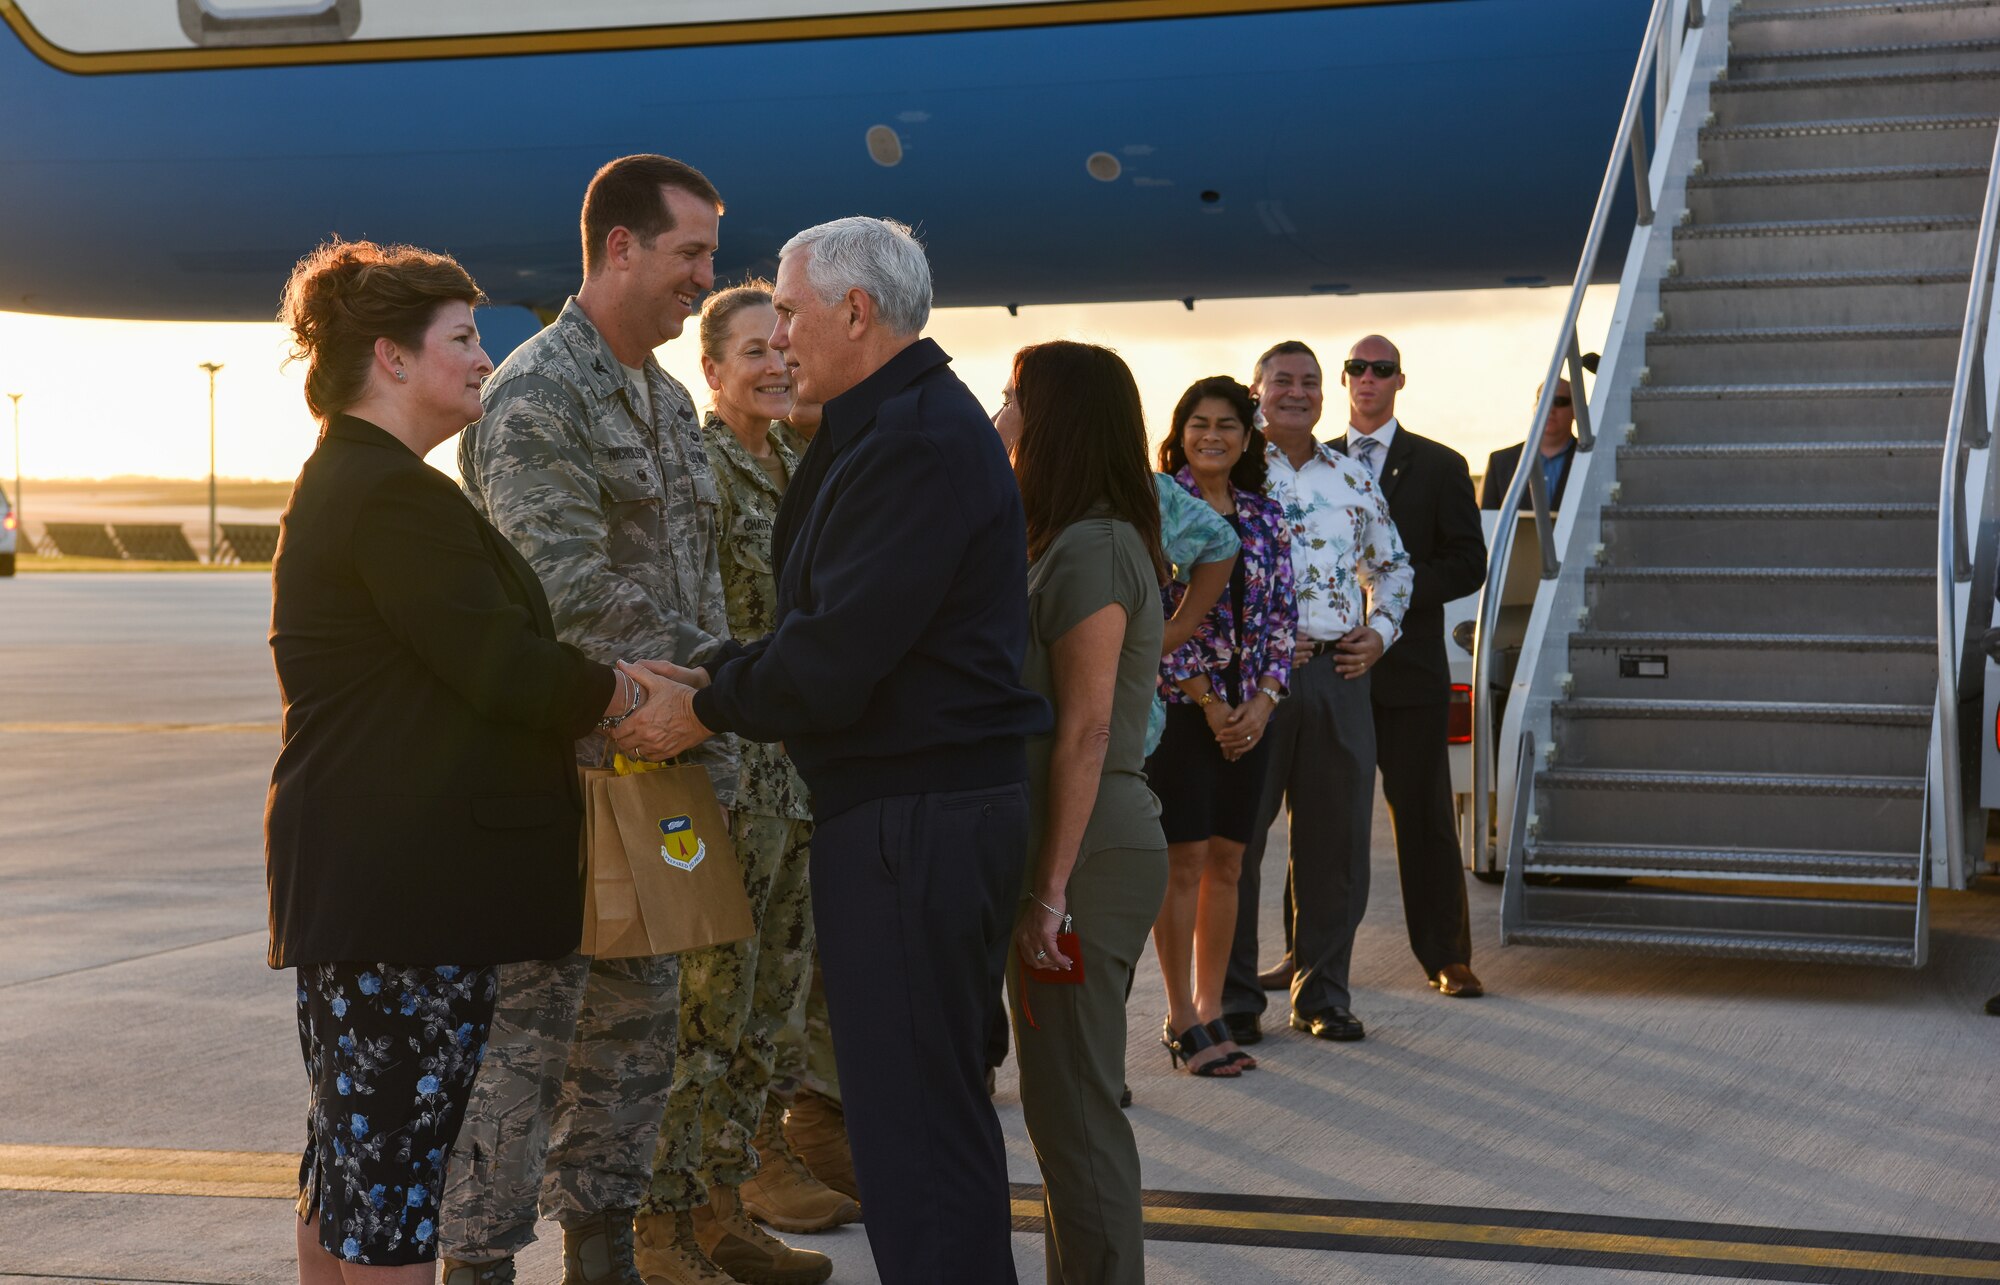 Vice President of the United States Michael Pence greets base leadership Nov. 18, 2018, at Andersen Air Force Base, Guam. The Vice President and his wife Karen visited the base to meet with Airmen and their families before the holidays. (U.S. Air Force photo by Senior Airman Christopher Quail)